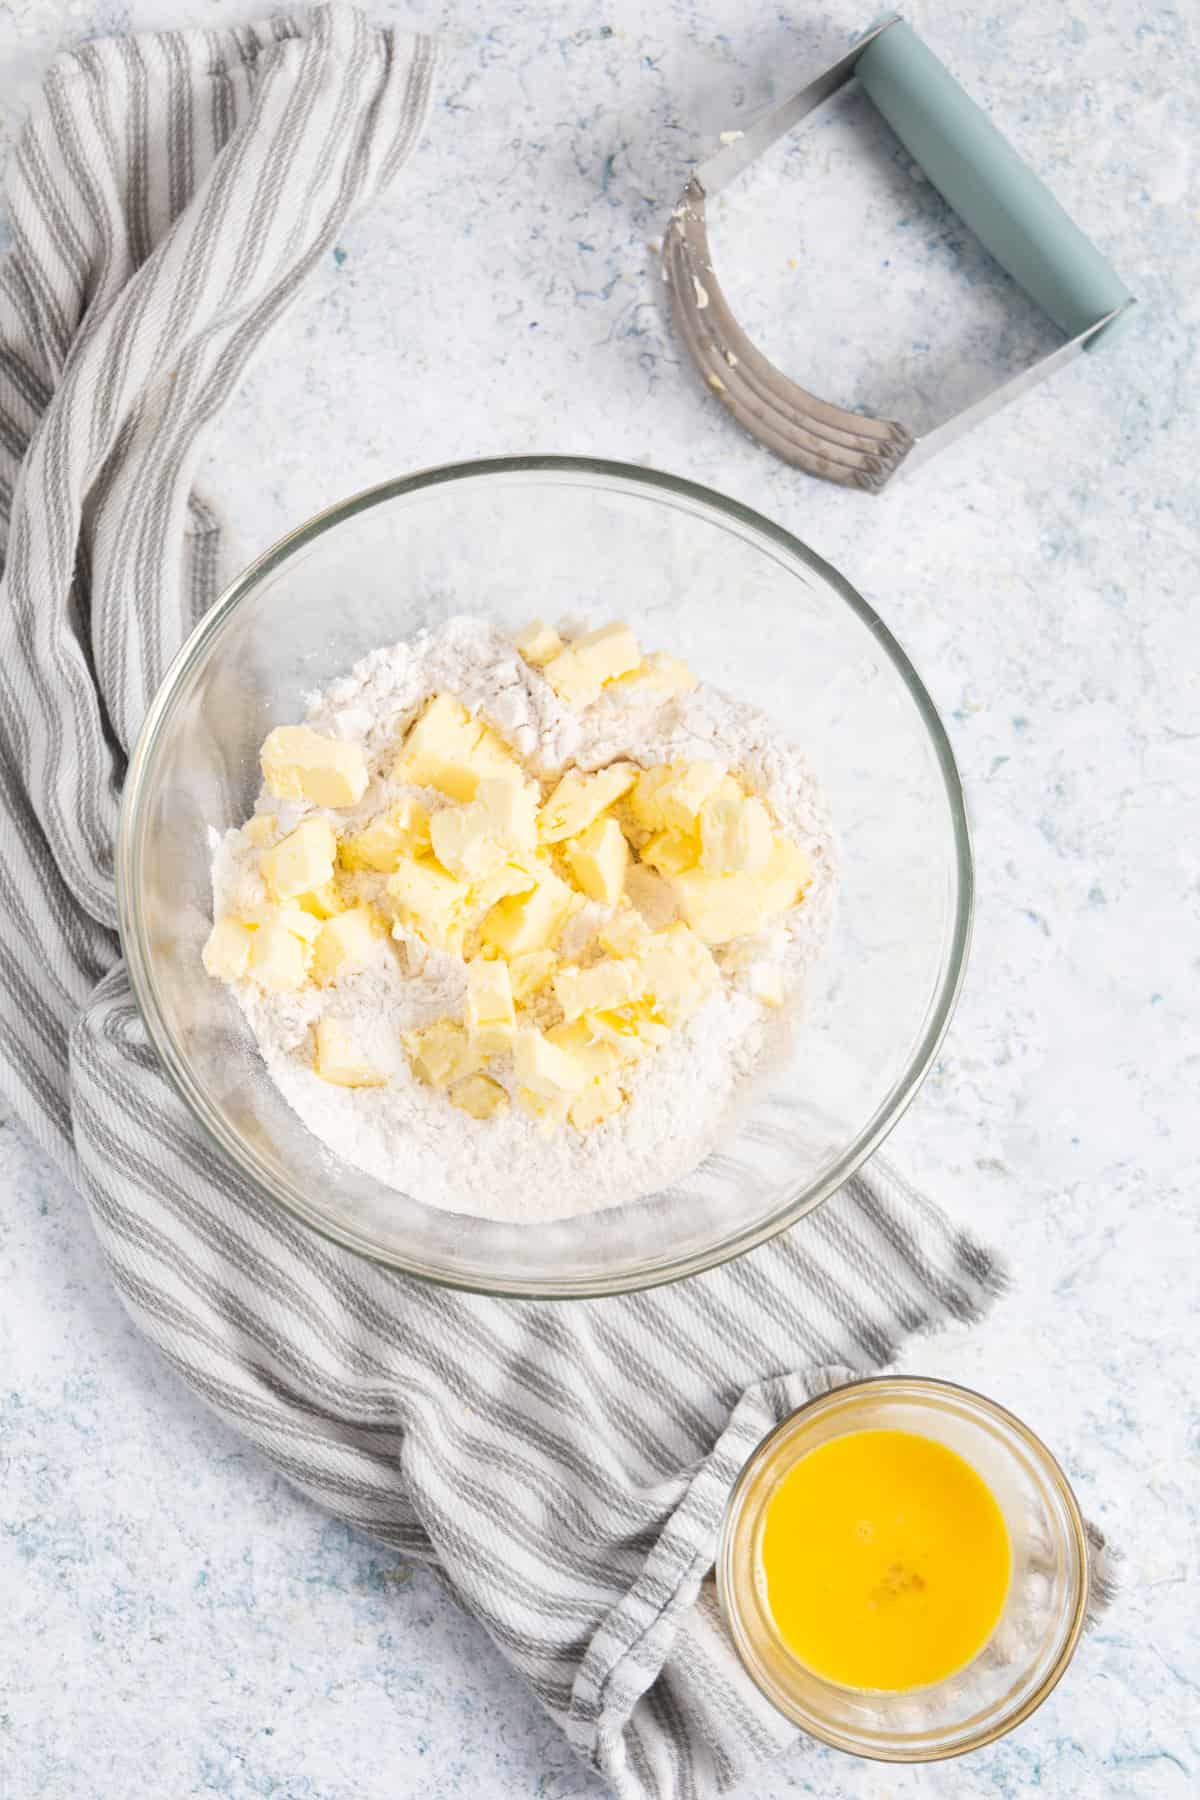 Butter and flour in a transparent bowl with a beaten egg in a small ramekin on the side.